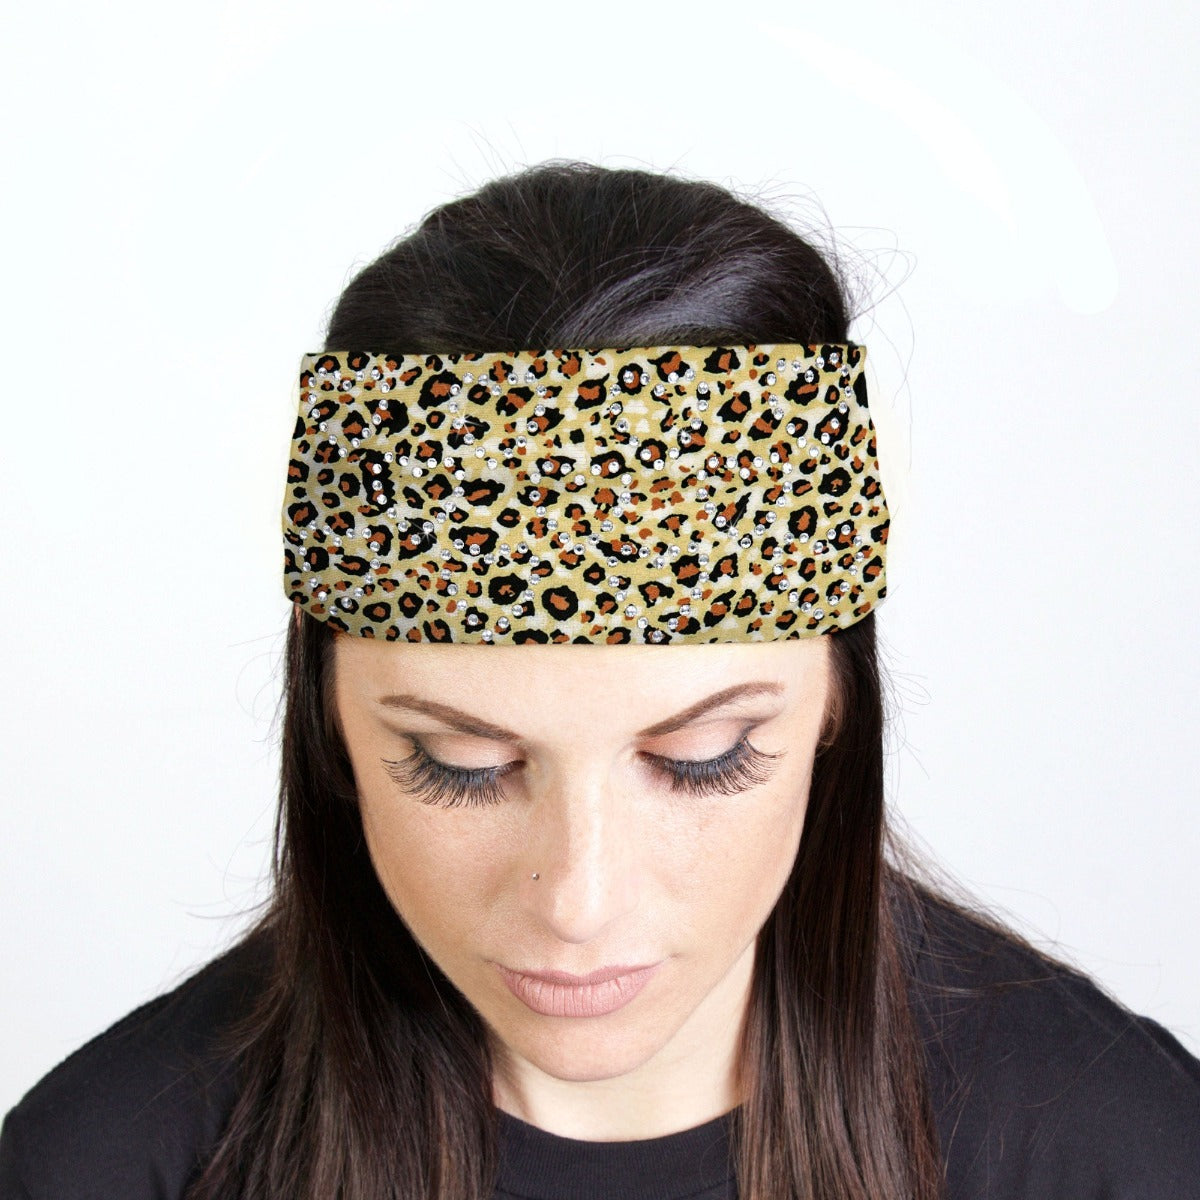 A woman sporting a Hot Leathers Leopard Print Bandana Headband Wraps w/Rhinestones with a touch of biker style.